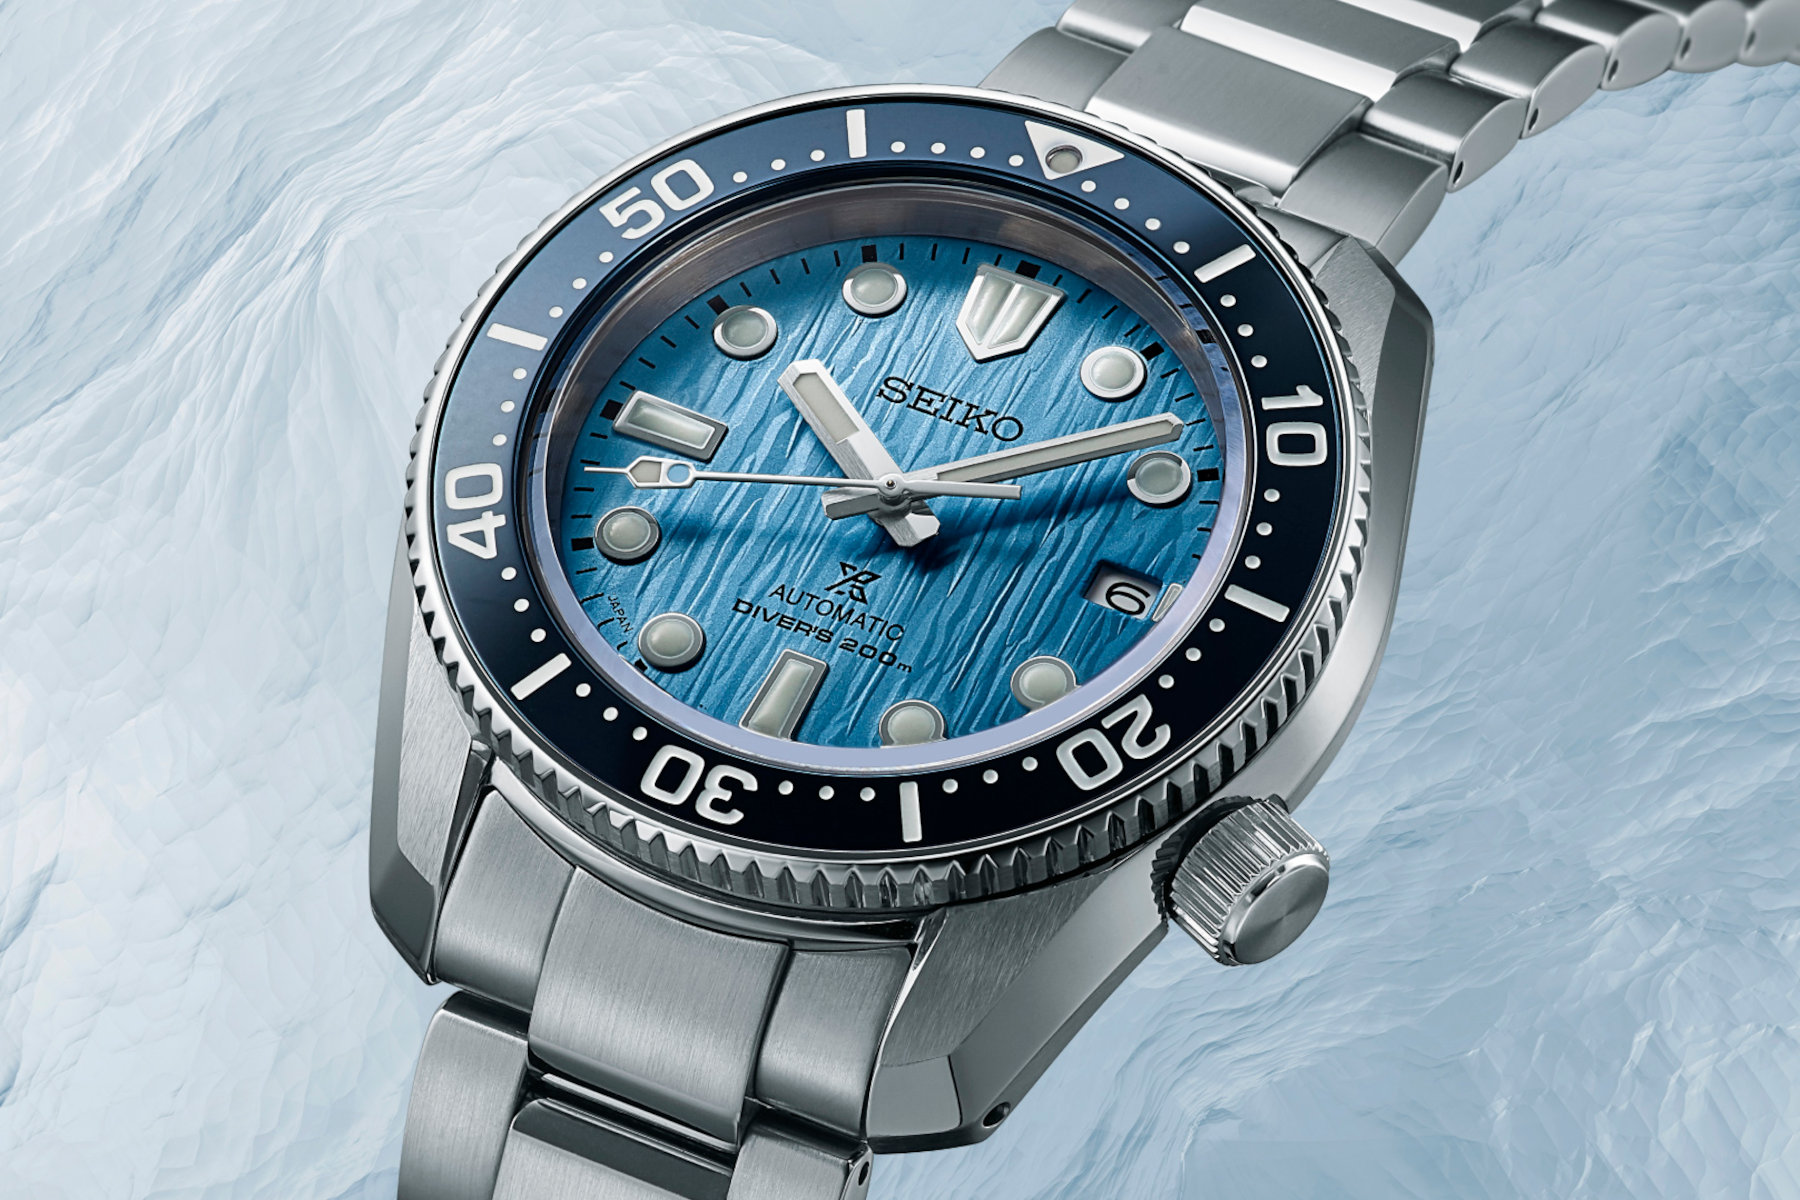 Seiko introduces 3 new Prospex Save the Oceans watches with icy dials.